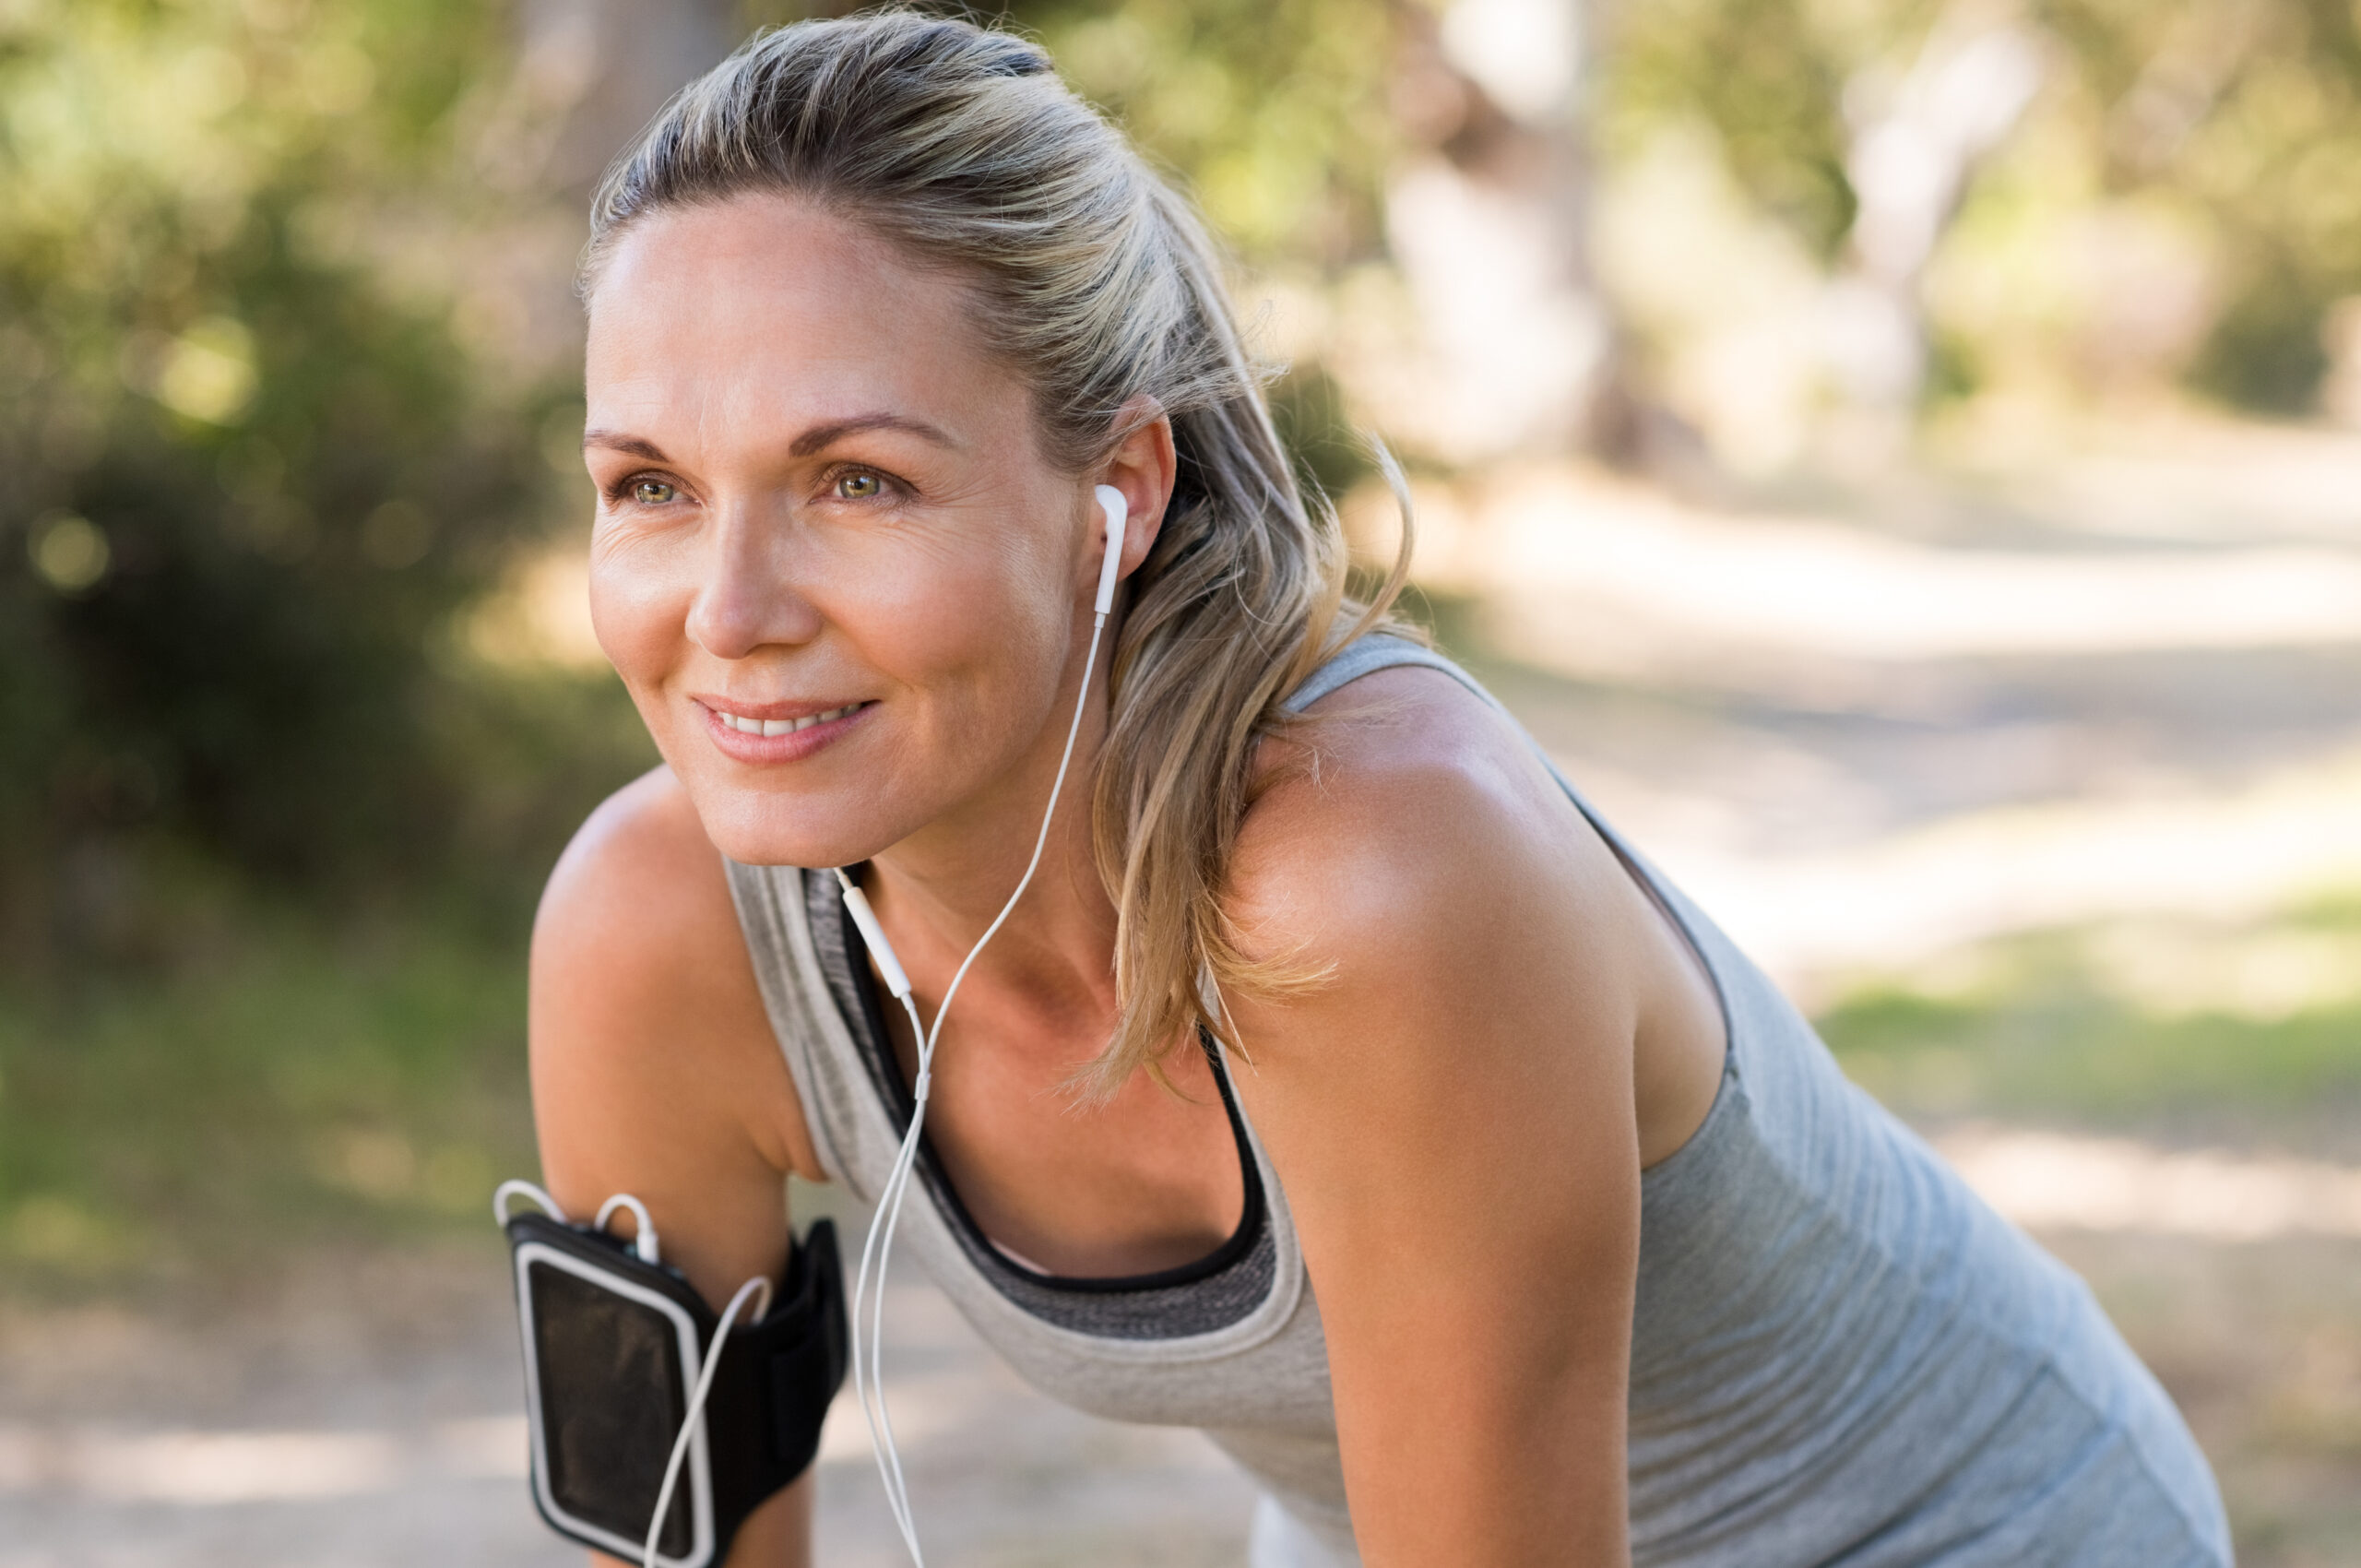 Woman doing exercise and moving her body, podcast episode called Exercise the Wonder Drug: Move the Body, Heal The Brain with Dr. Jennifer Heisz & Caroline Williams.